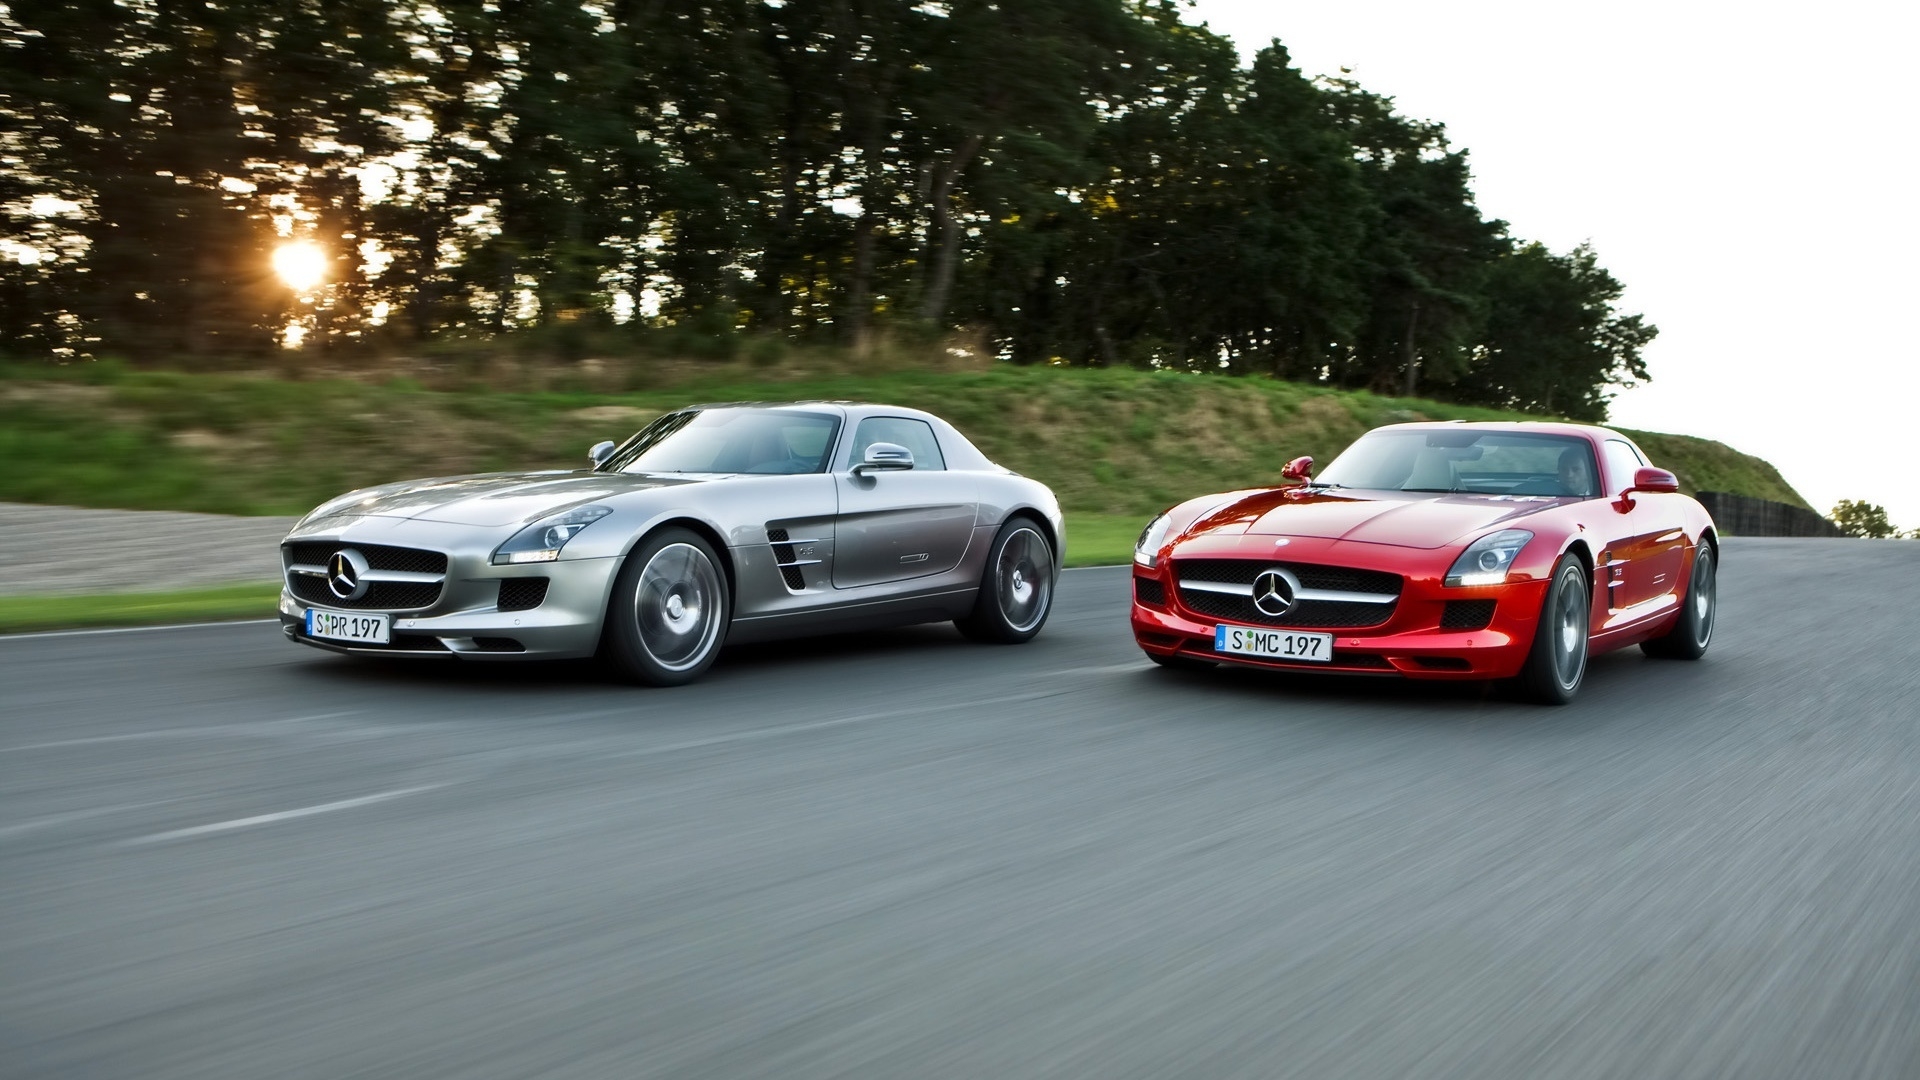 Mercedes-Benz SLS AMG Duo 2010 for 1920 x 1080 HDTV 1080p resolution